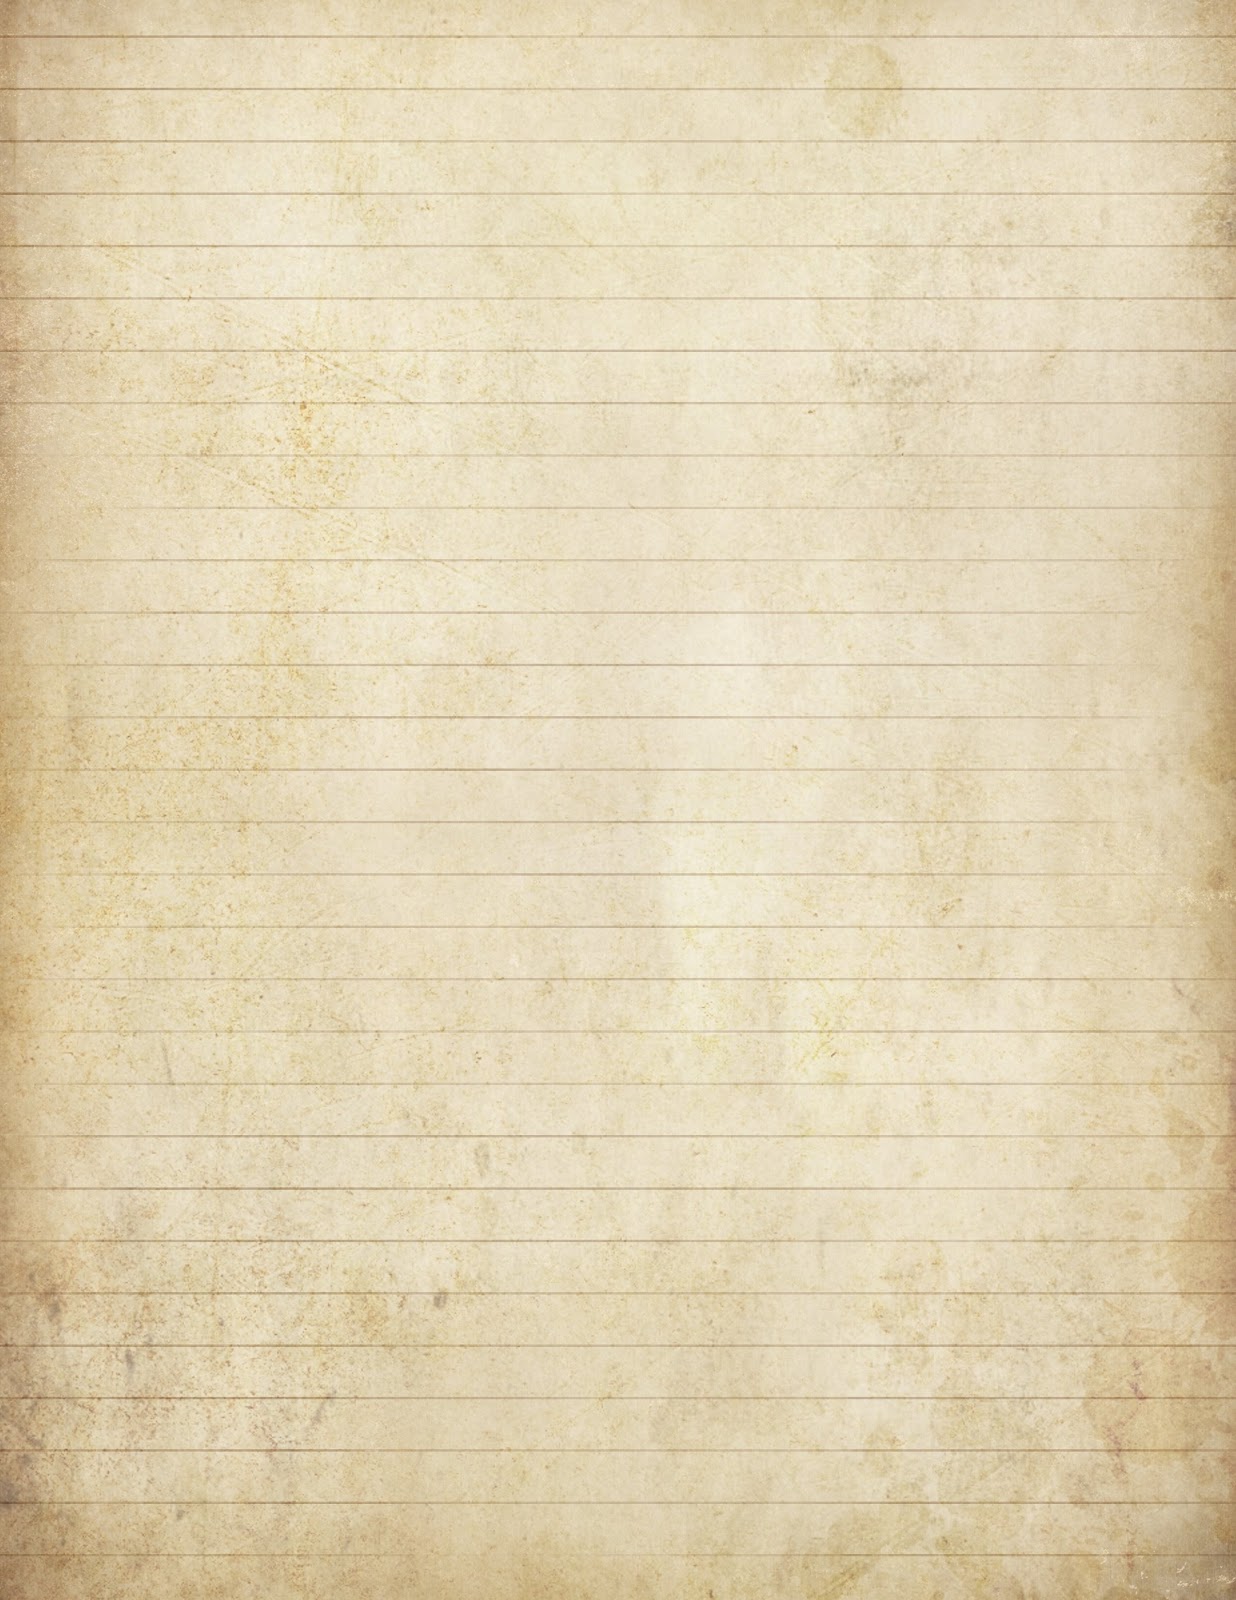 Antiqued Lined Paper Template